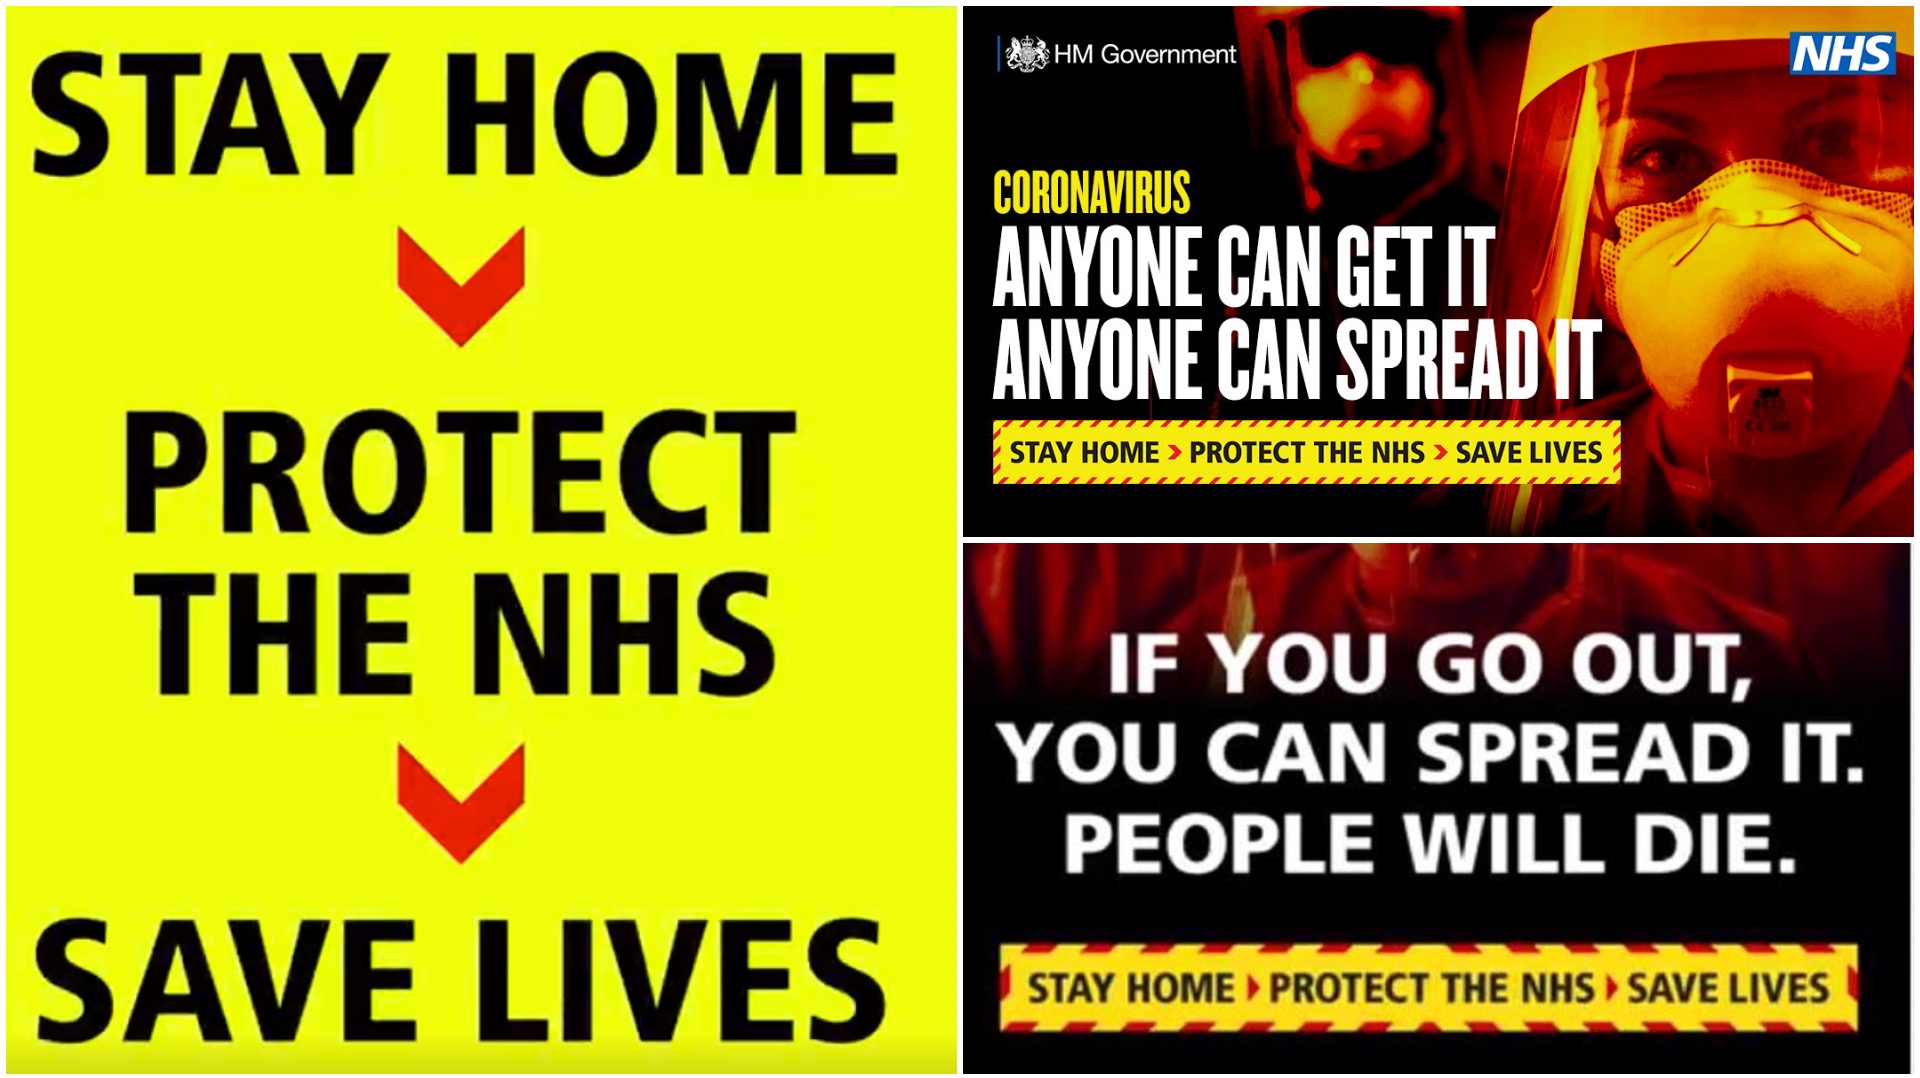 Government launches new coronavirus advert with stay at home or 'people